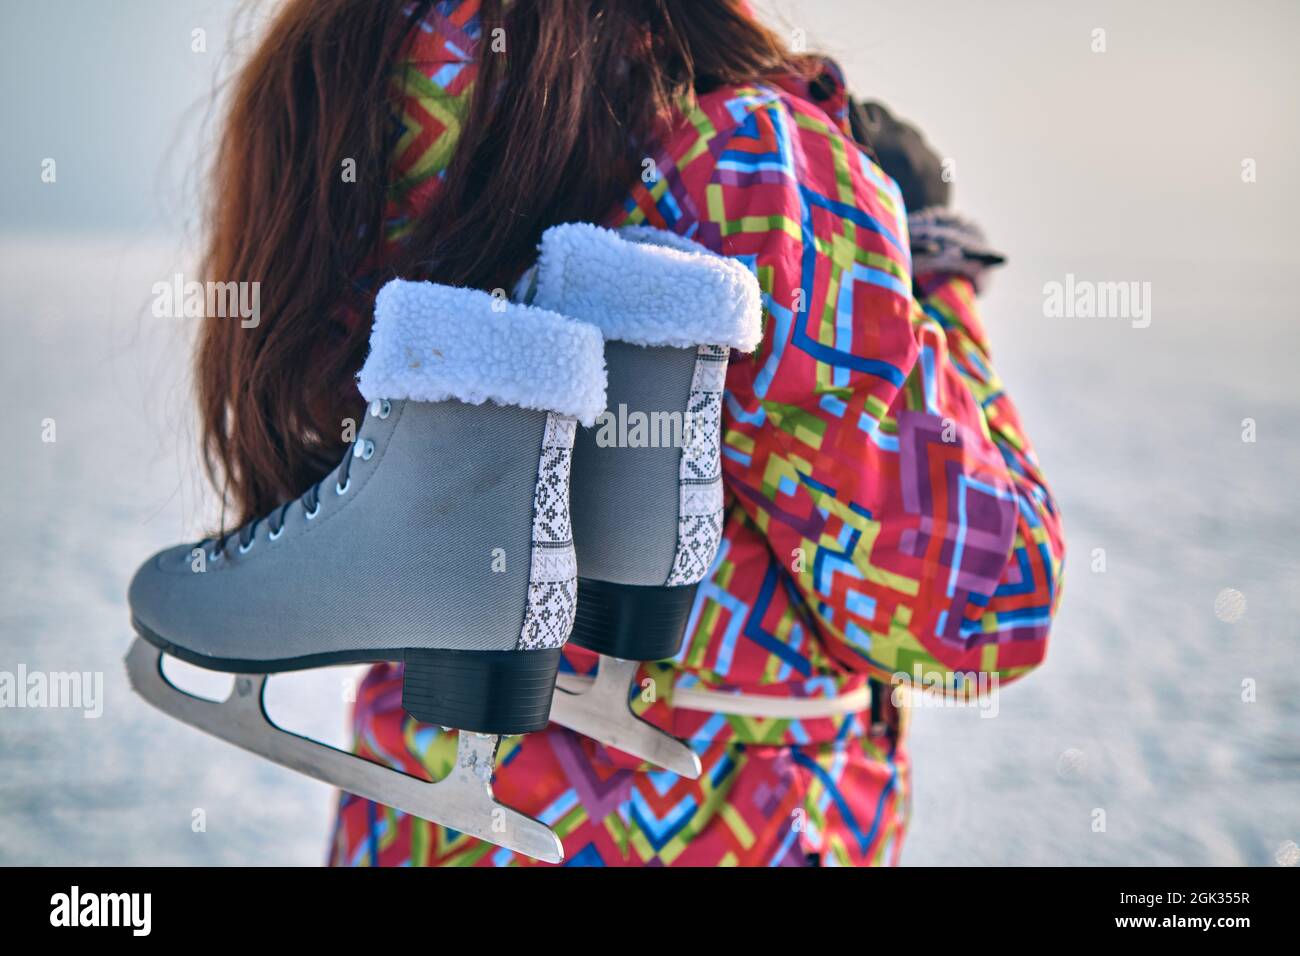 A woman in a ski suit holds skates on her shoulder, after skiing on a frozen lake, closeup Stock Photo